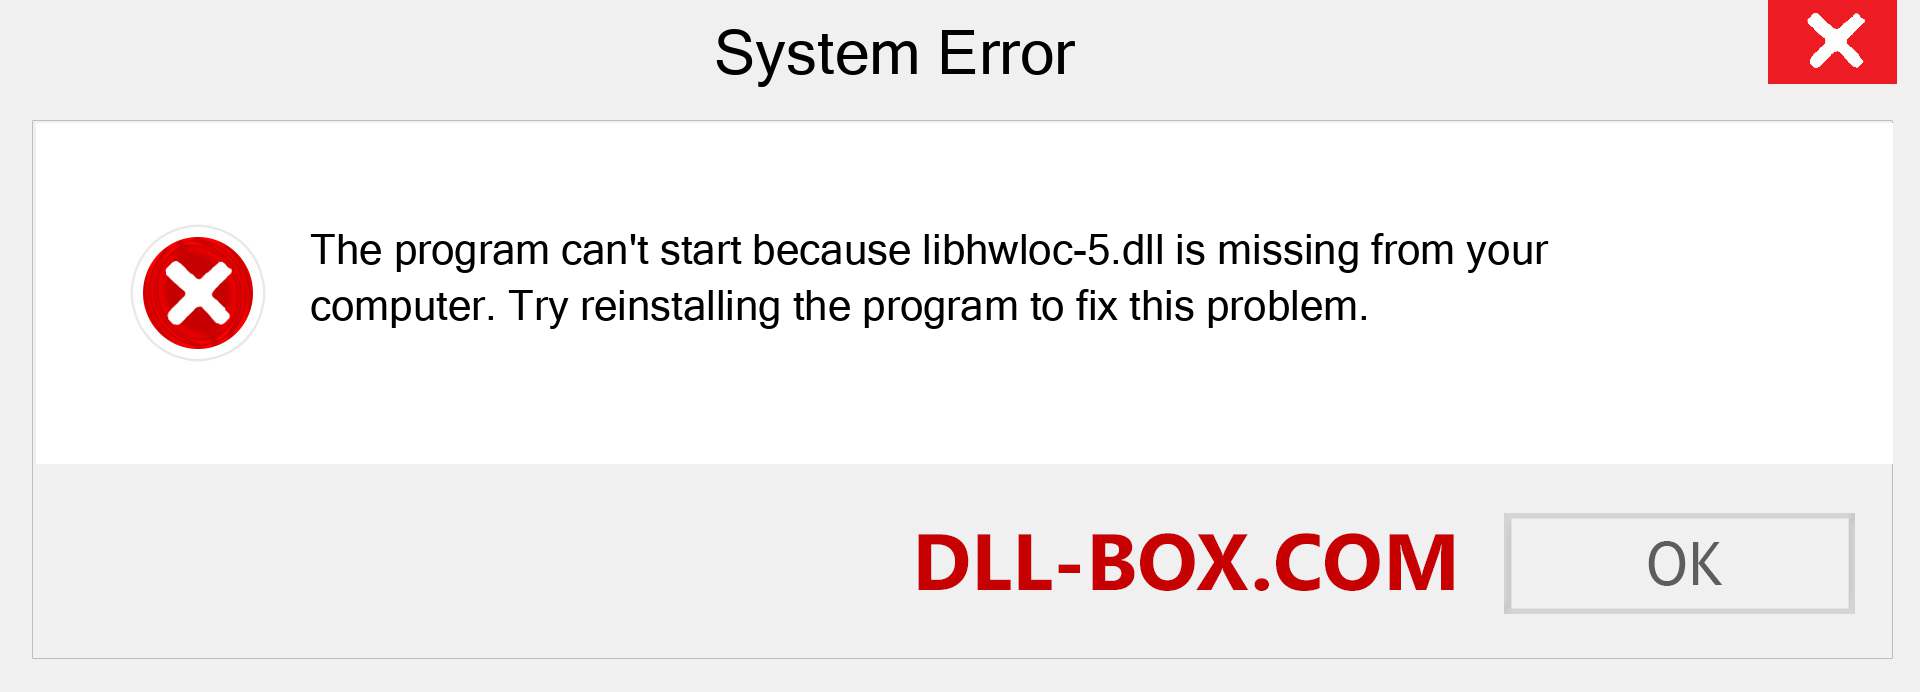  libhwloc-5.dll file is missing?. Download for Windows 7, 8, 10 - Fix  libhwloc-5 dll Missing Error on Windows, photos, images